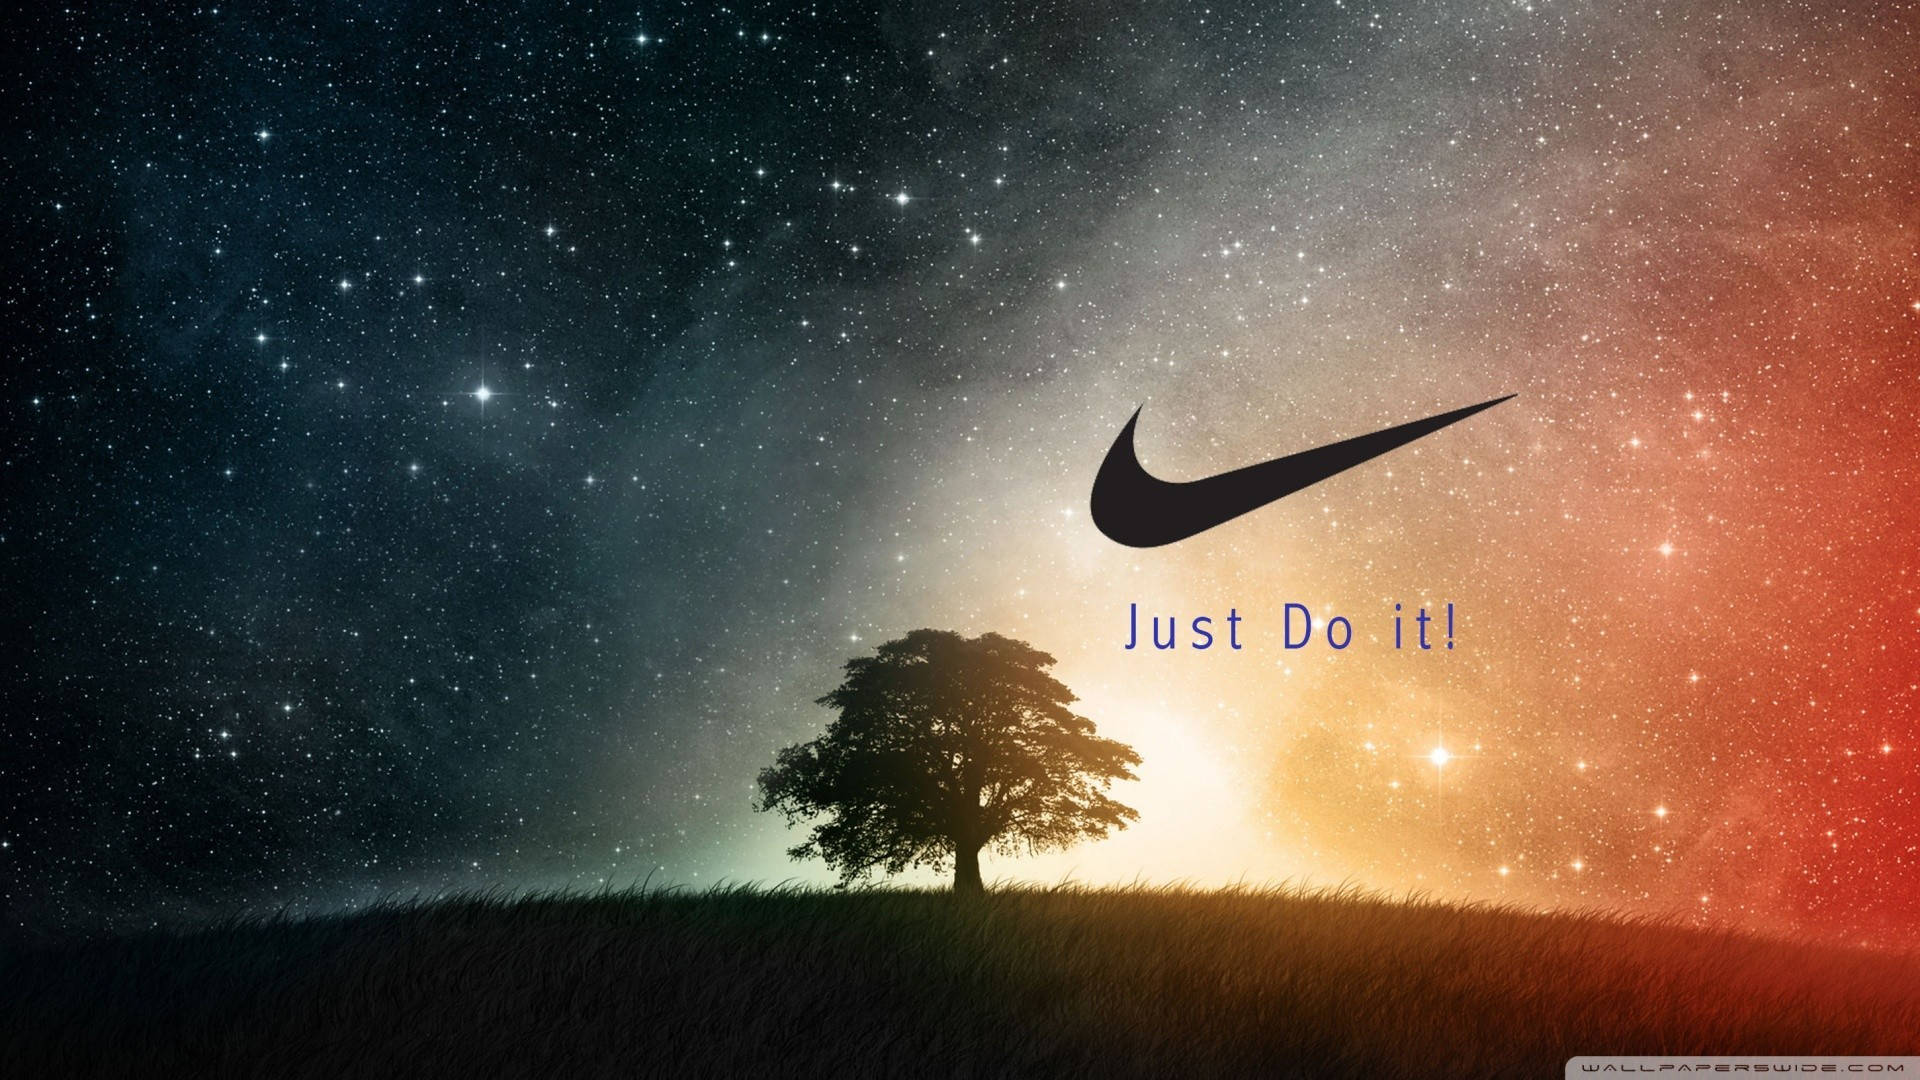 Just Do It - The Unstoppable Spirit Of Determination And Positivity Background